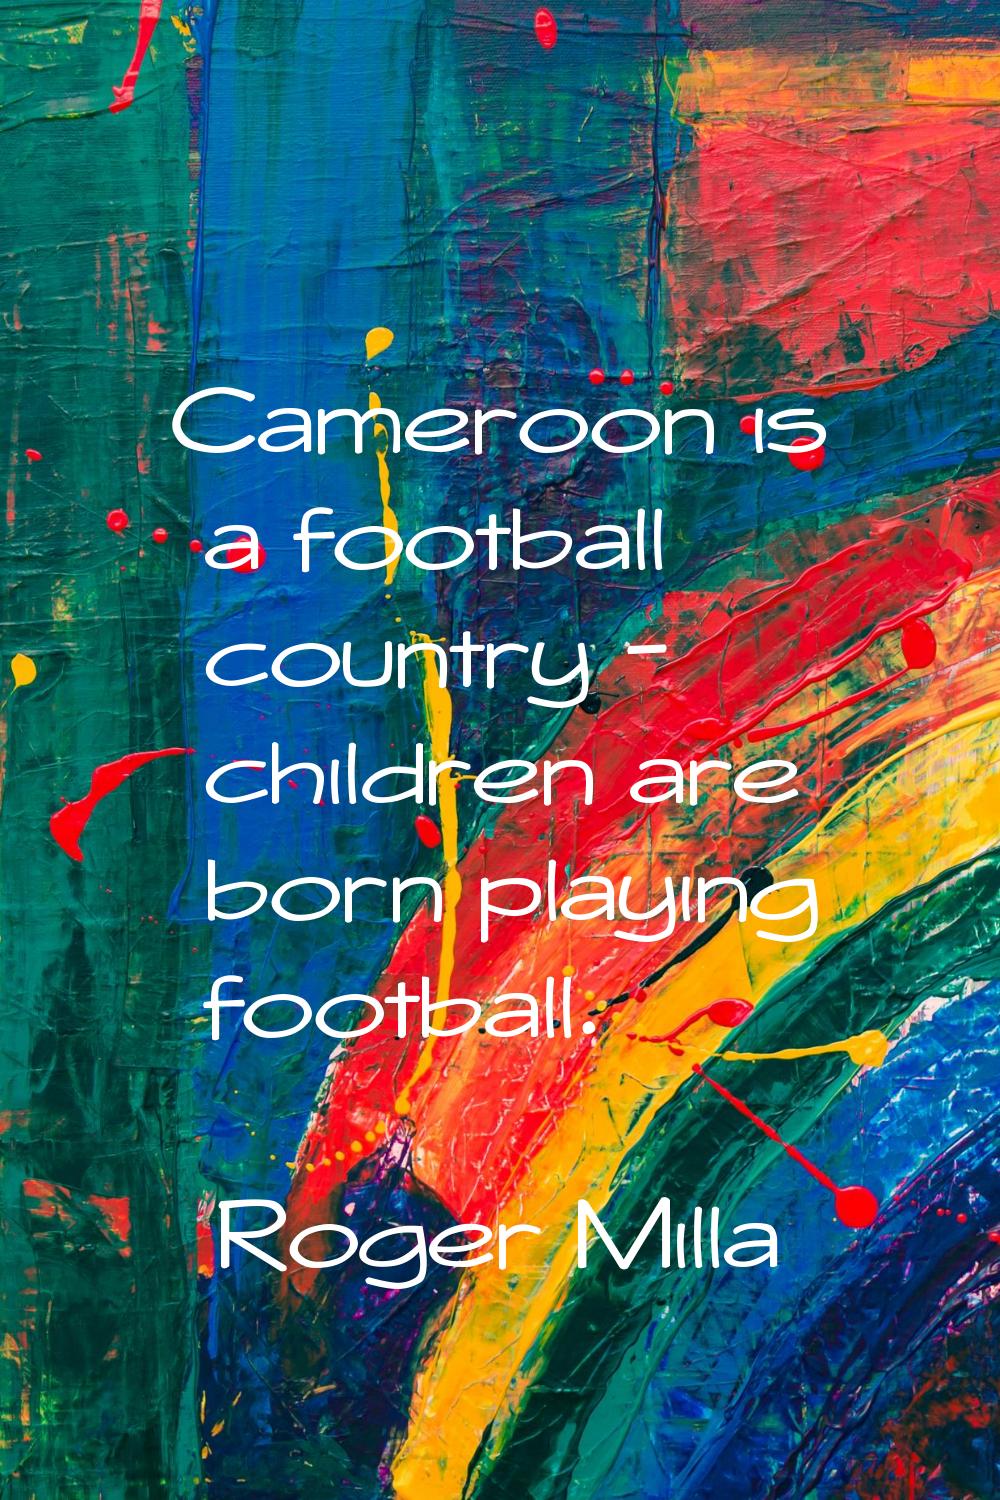 Cameroon is a football country - children are born playing football.